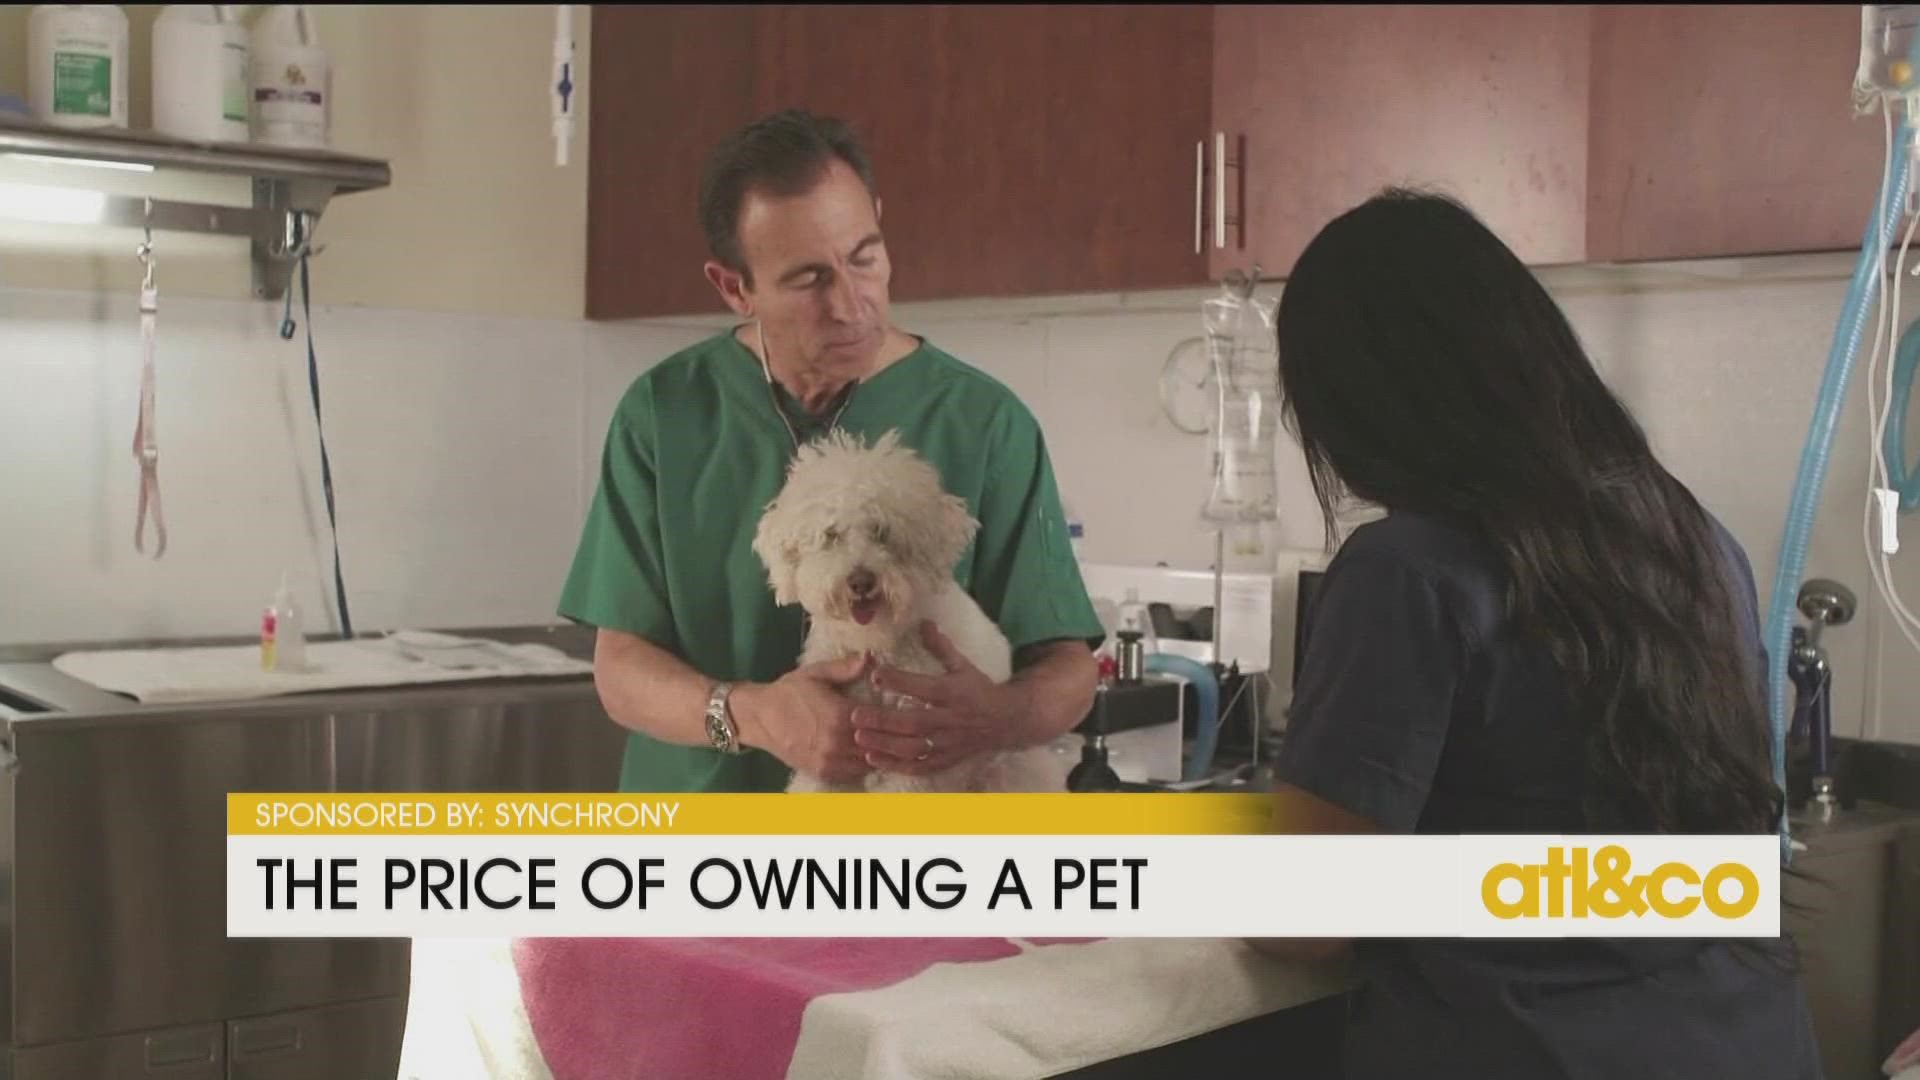 Don't underestimate the lifetime cost of pet care.